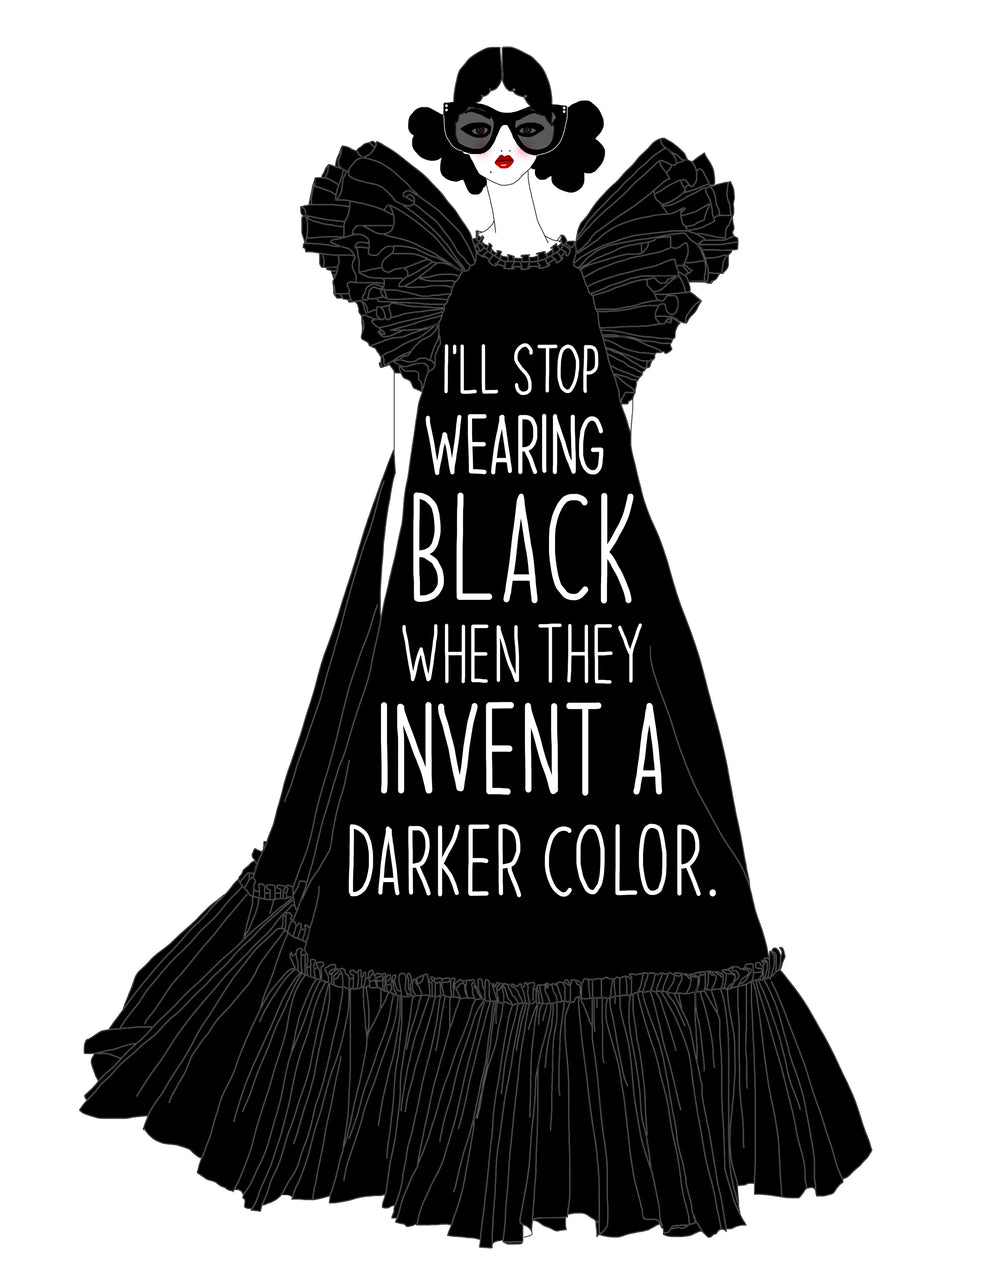 I'll Stop Wearing Black When They Invent a Darker Color. (PRINT)